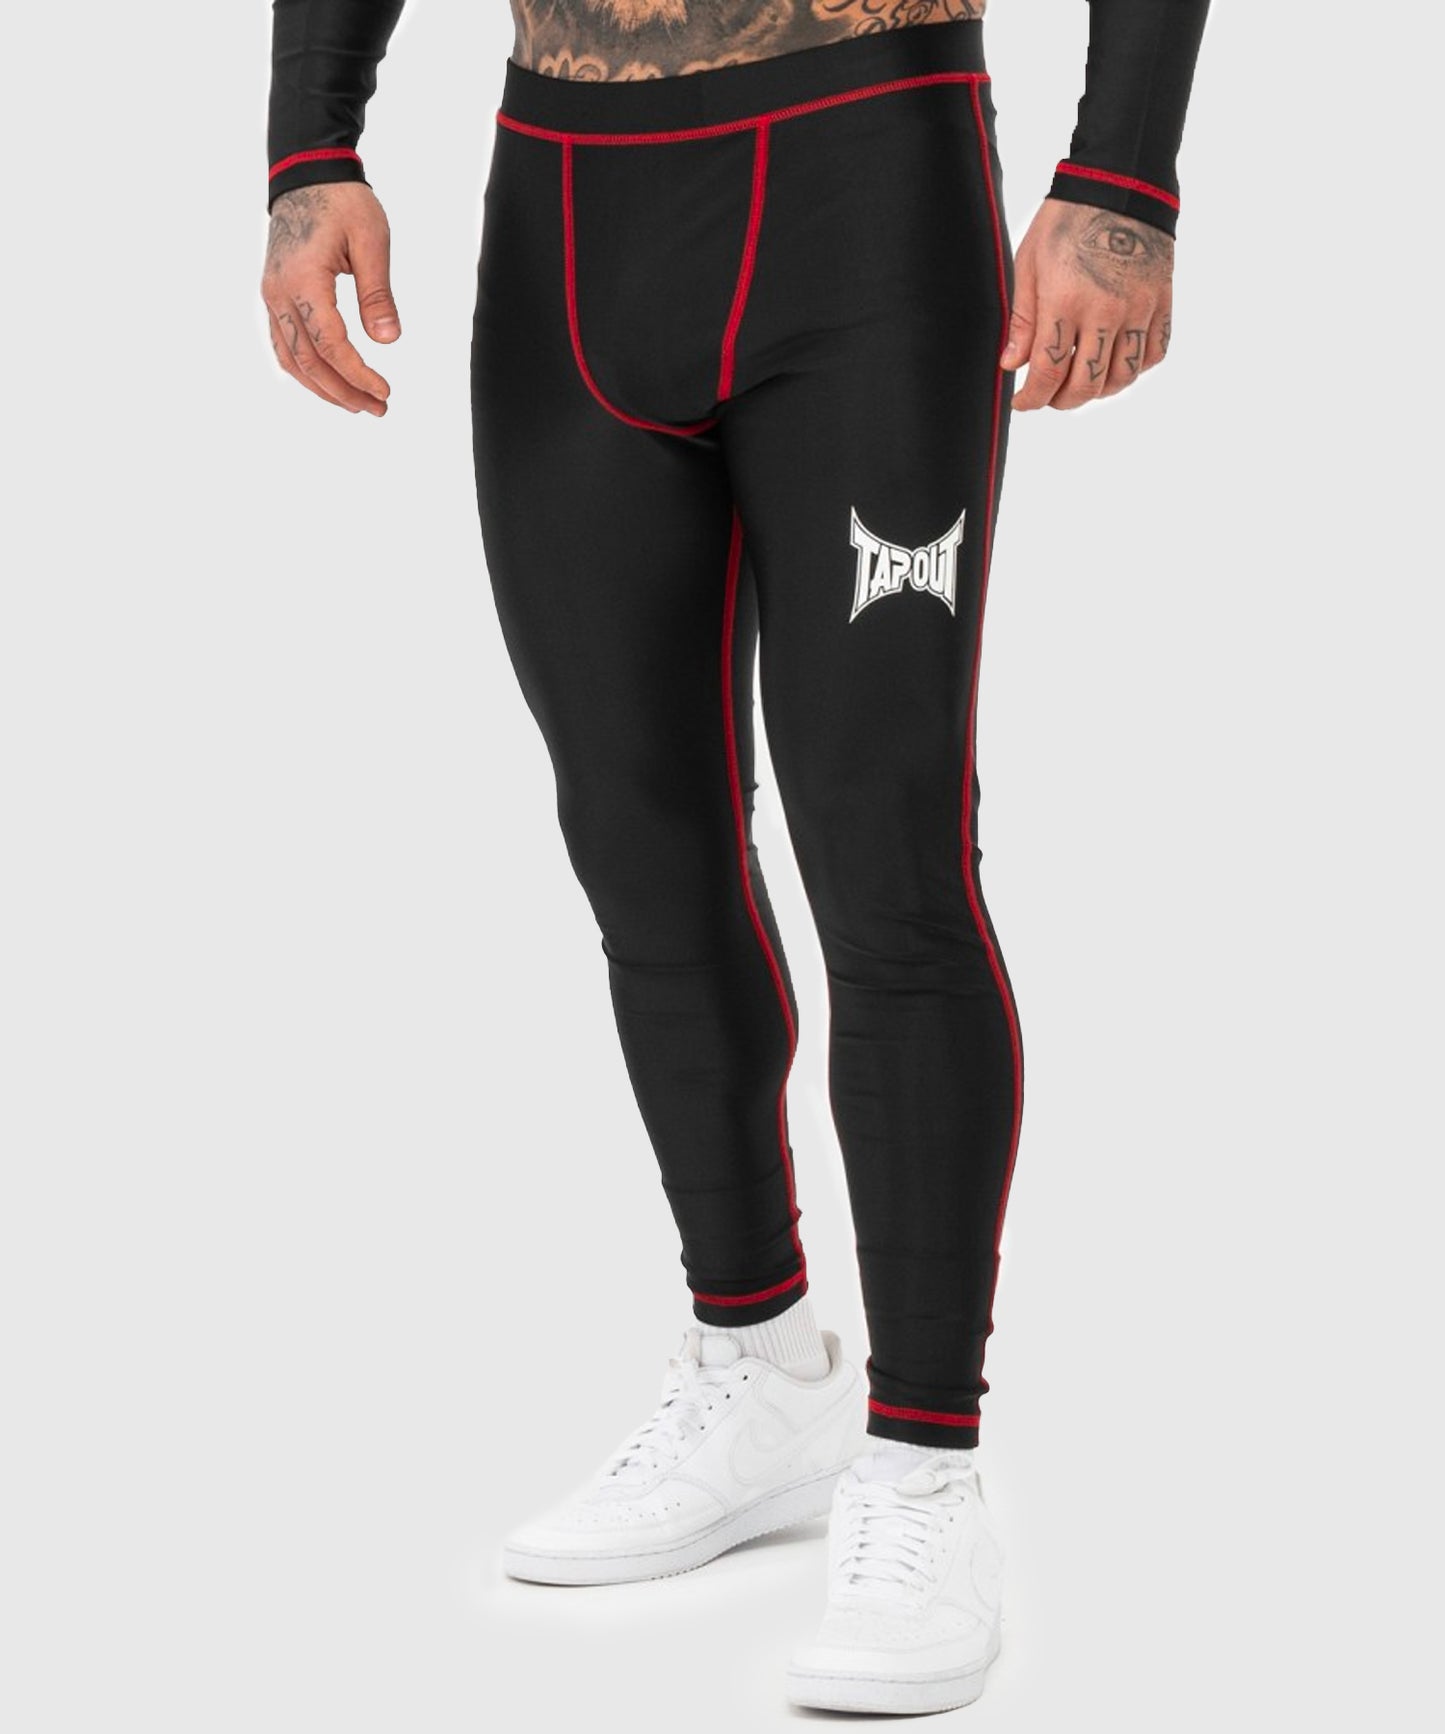 Spats Tapout Functional Slim Fit